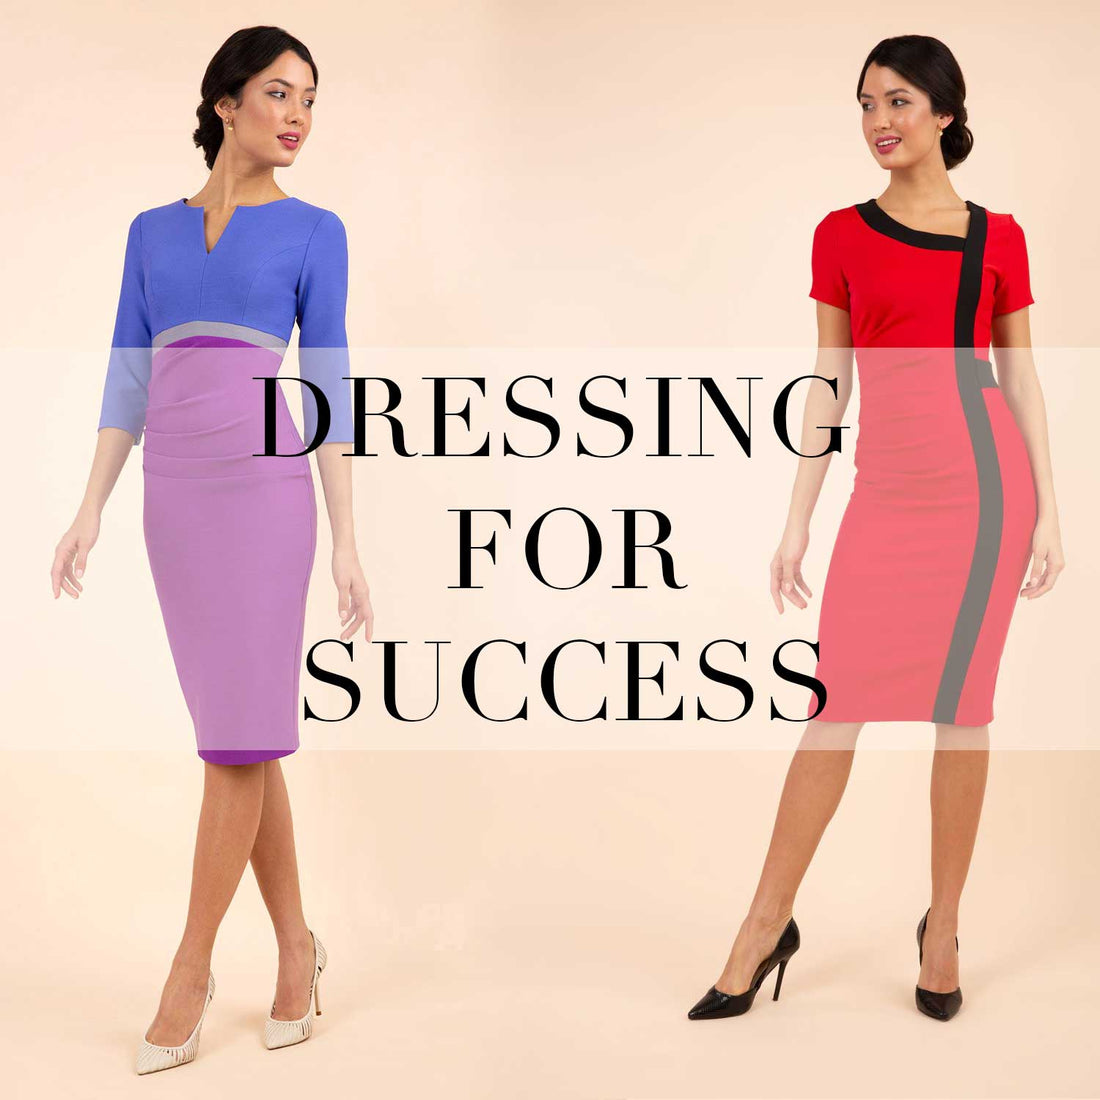 dressing for success writing over an image of a model wearing diva catwalk pencil dresses